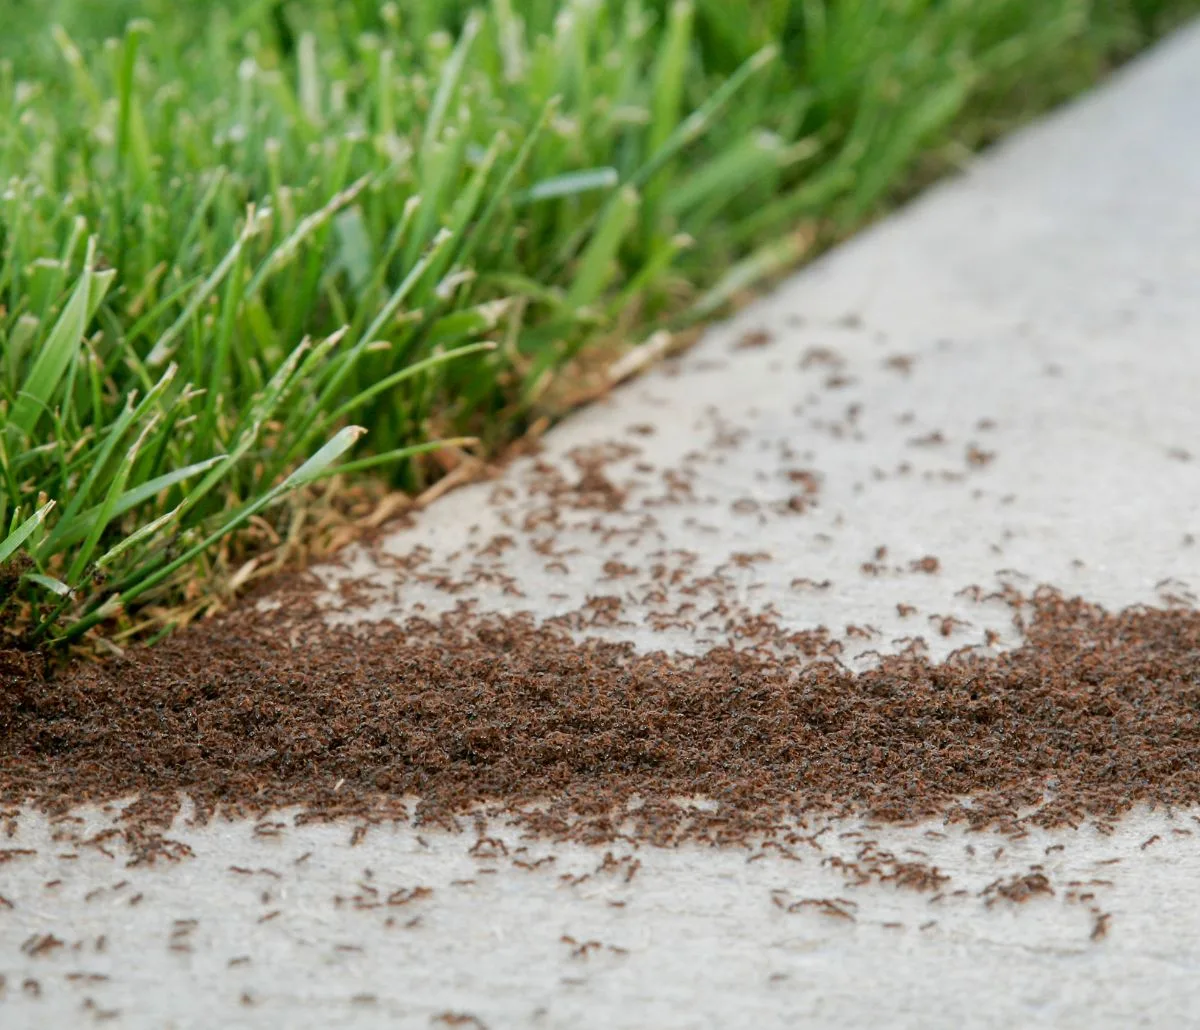 fire ant mound and fire ants in grass